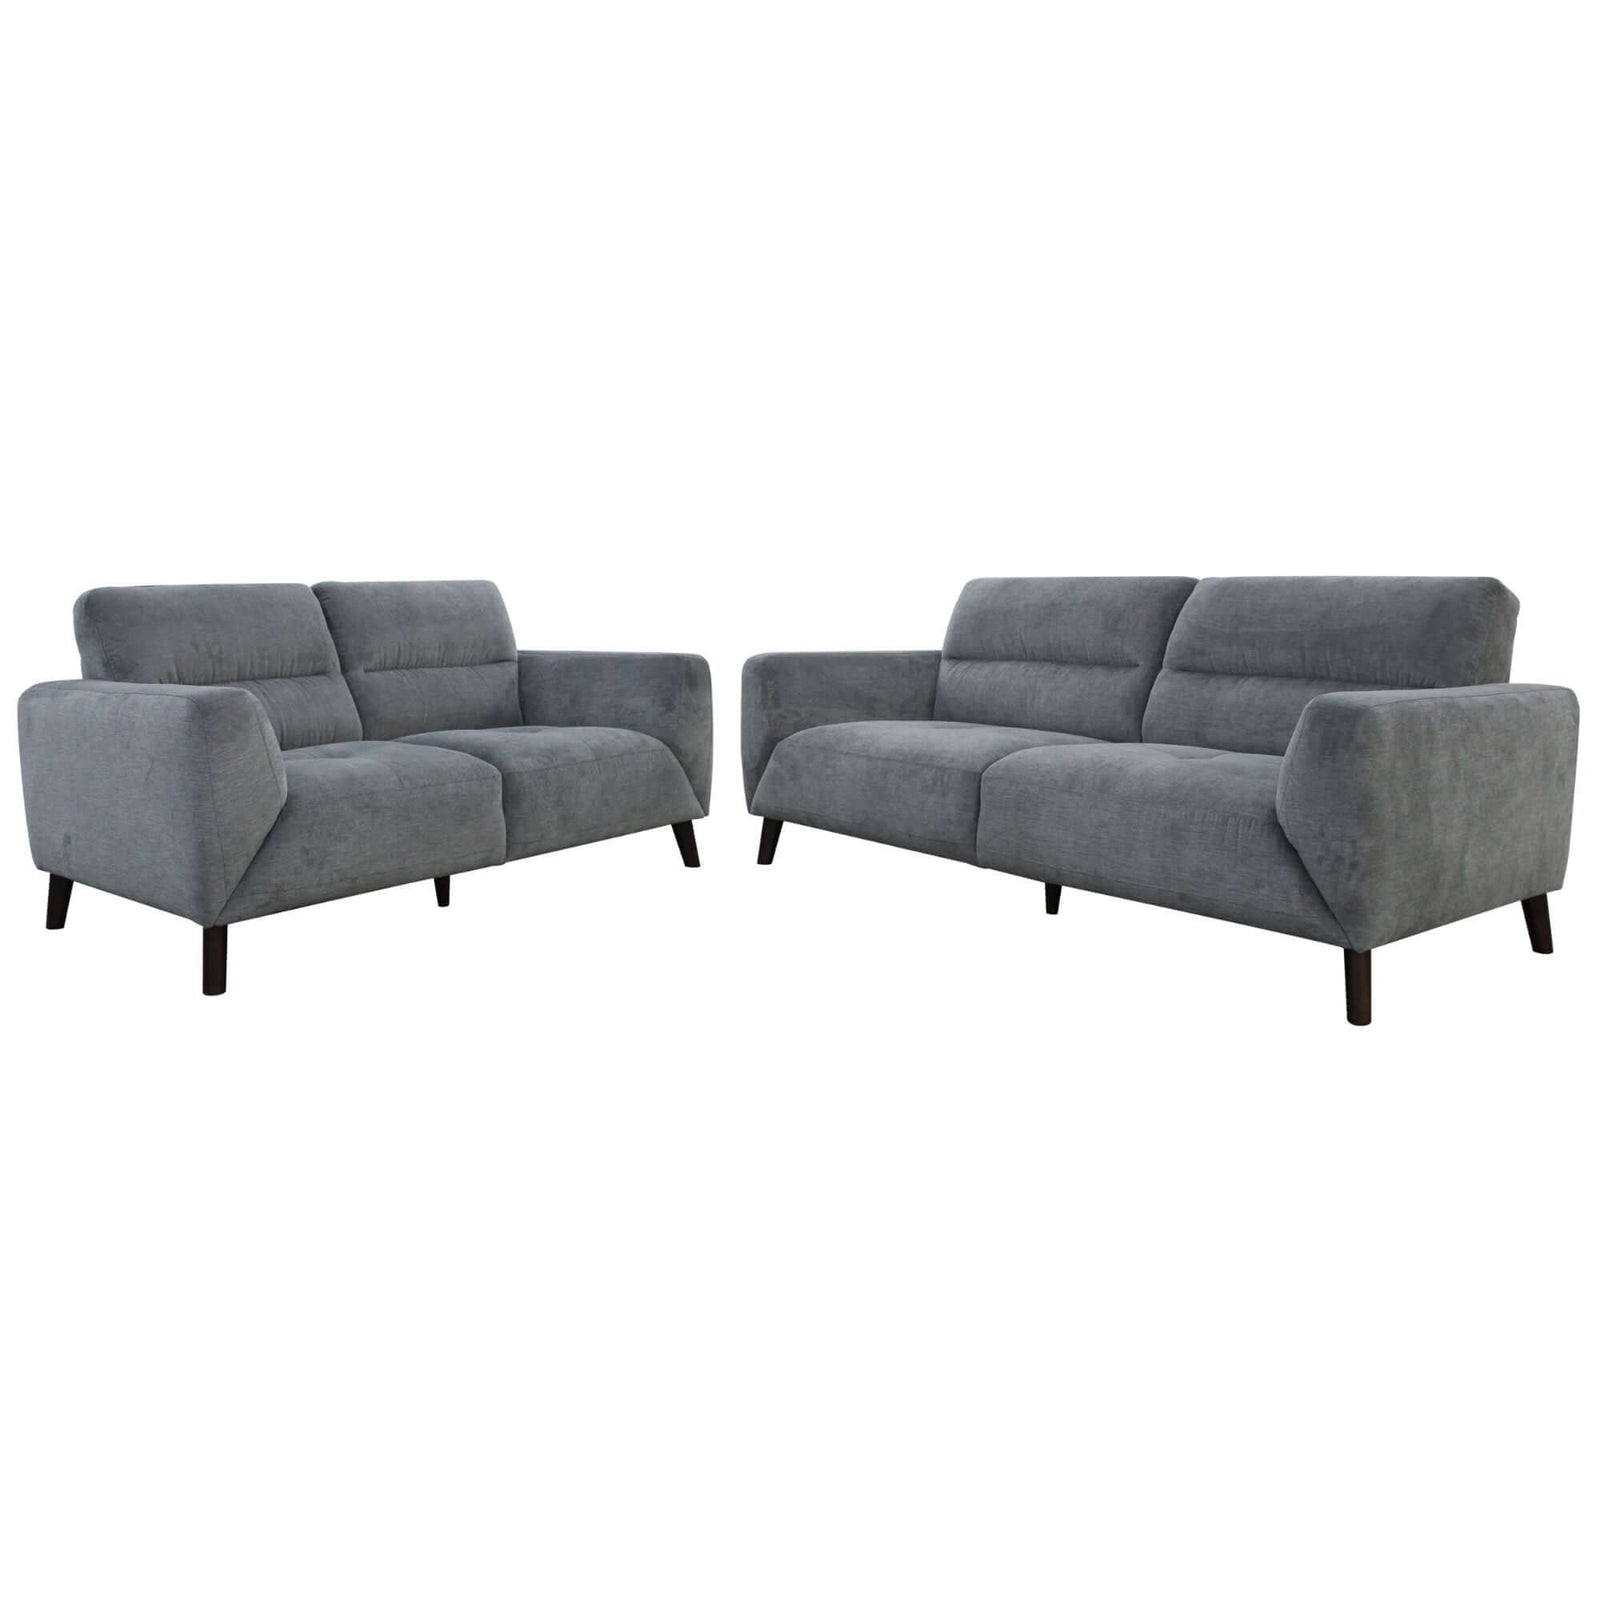 Monarch 2pc Sofa Set - Charcoal Fabric Lounge Couch-Upinteriors